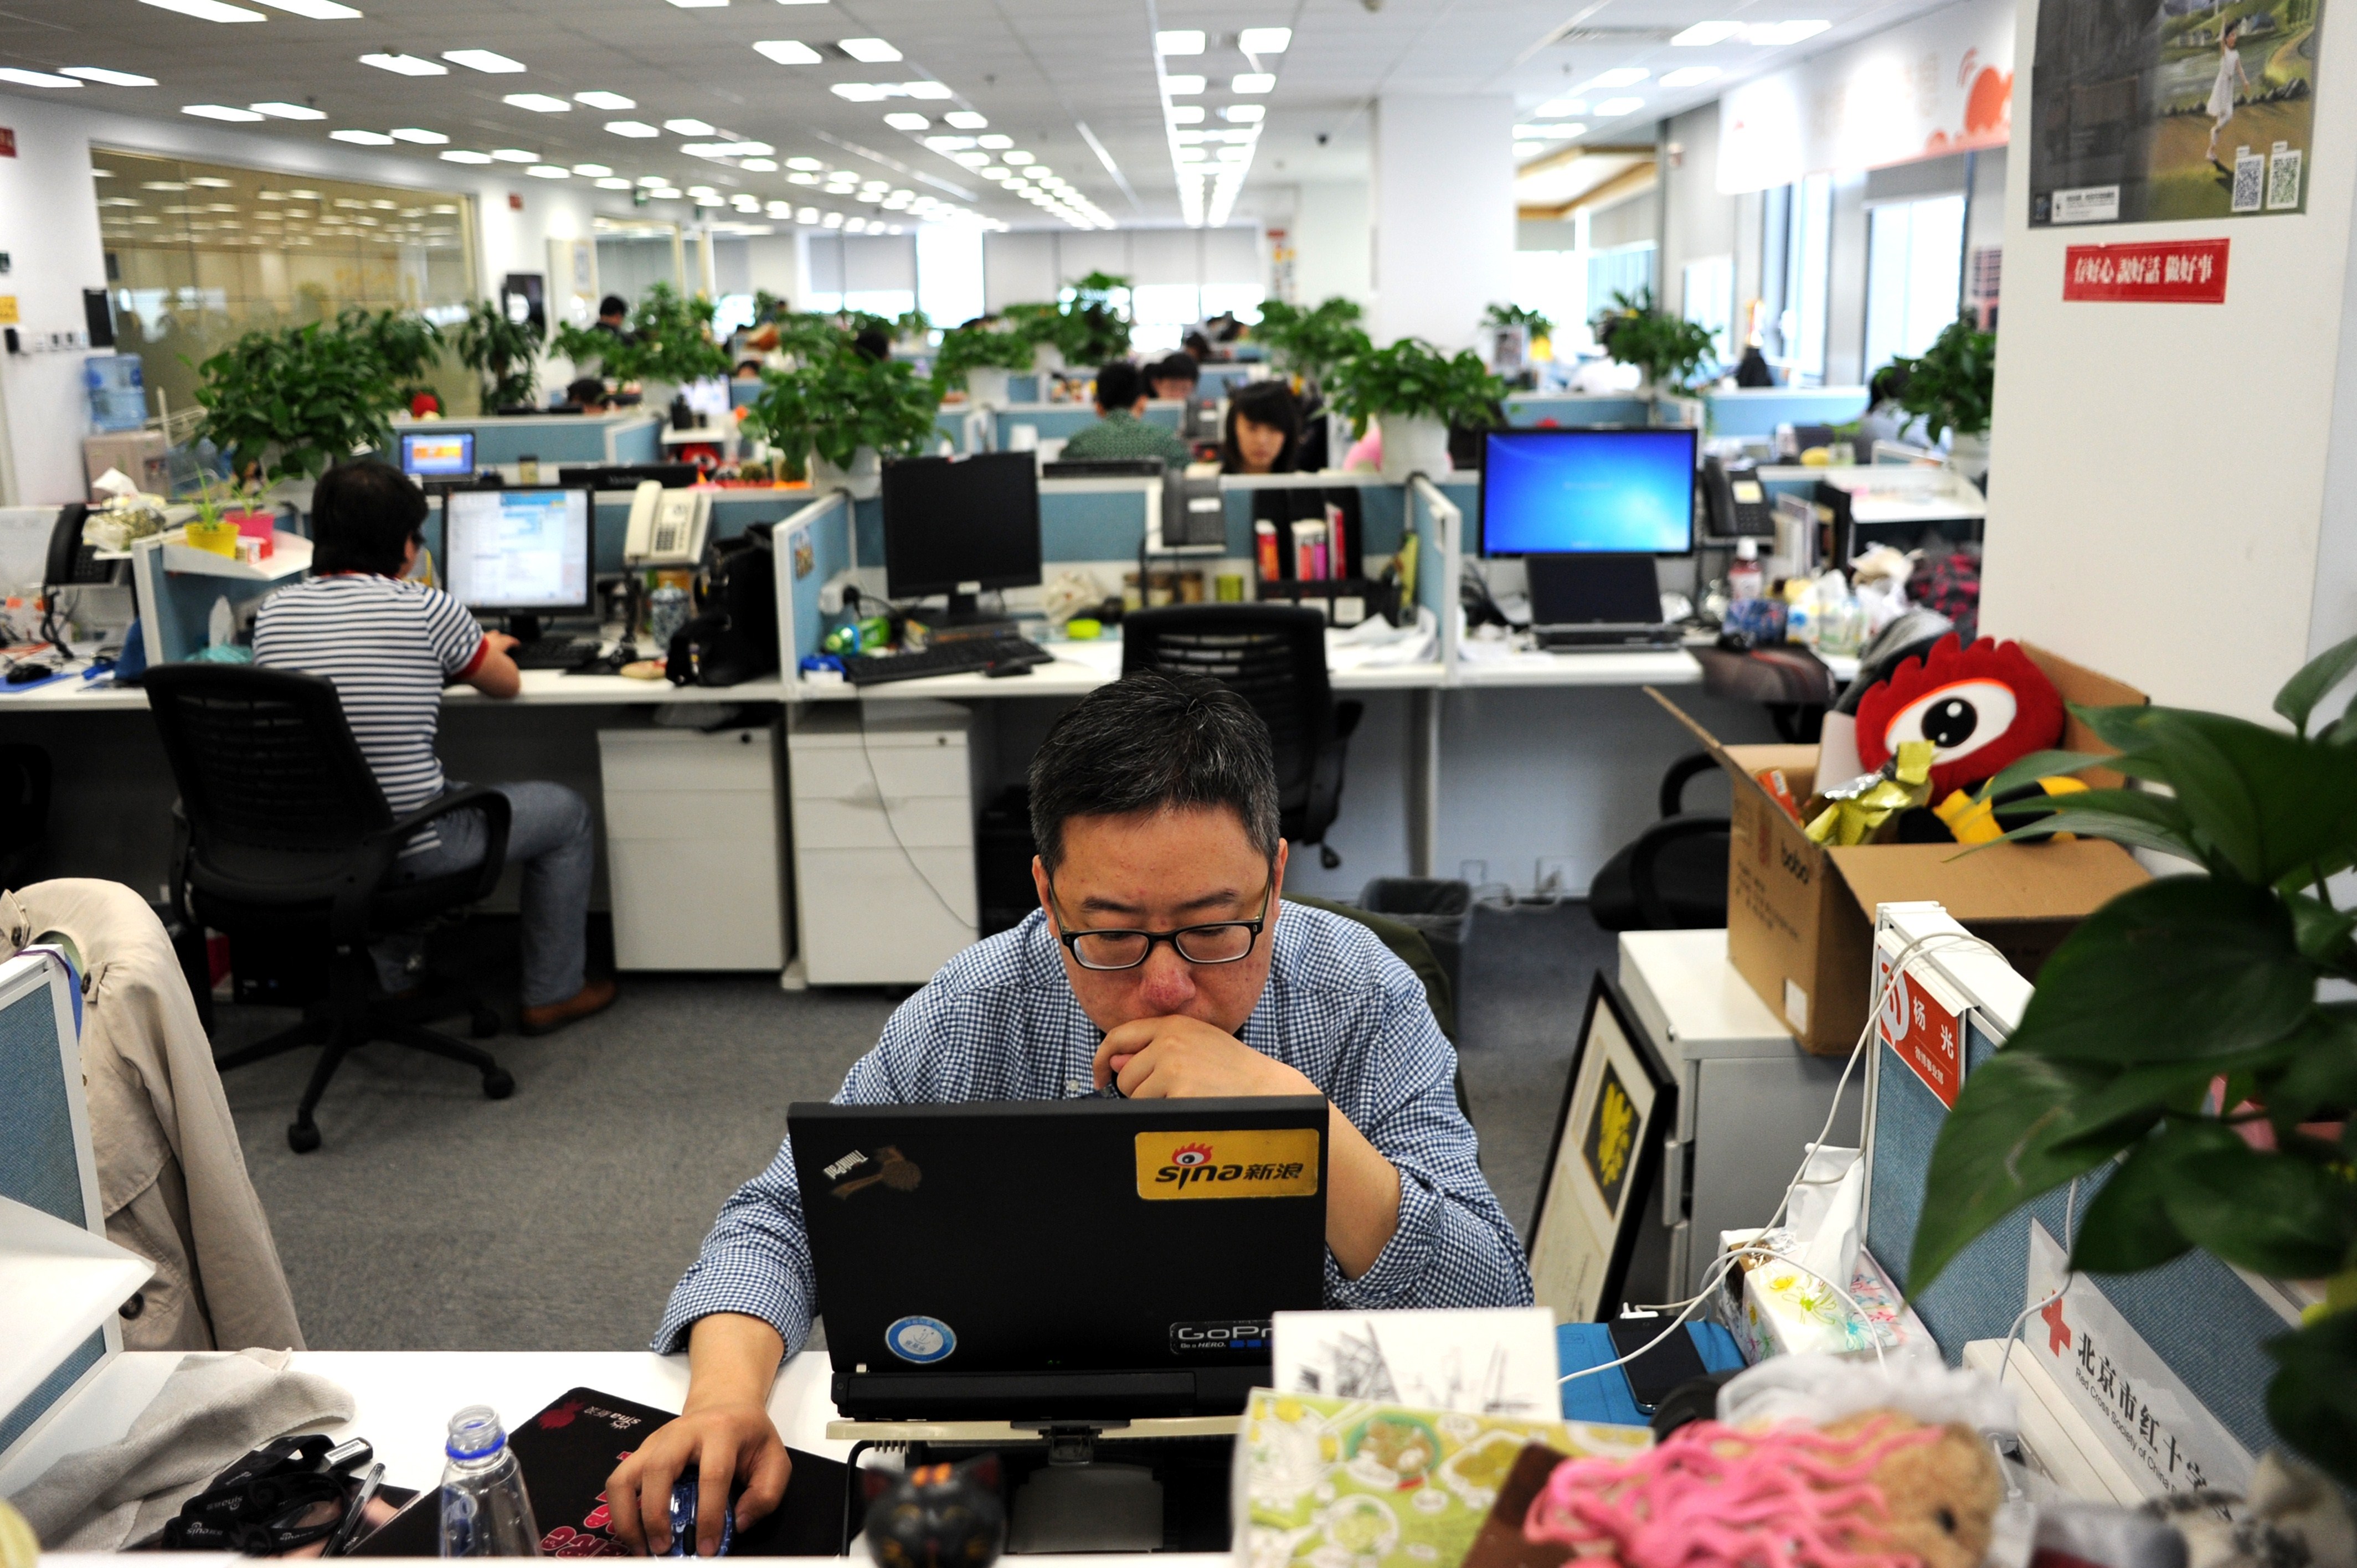 This picture taken on April 16, 2014 shows a man using a laptop at an office of Sina Weibo, widely known as China's version of Twitter, in Beijing. (Wang Zhao&mdash;AFP/Getty Images)